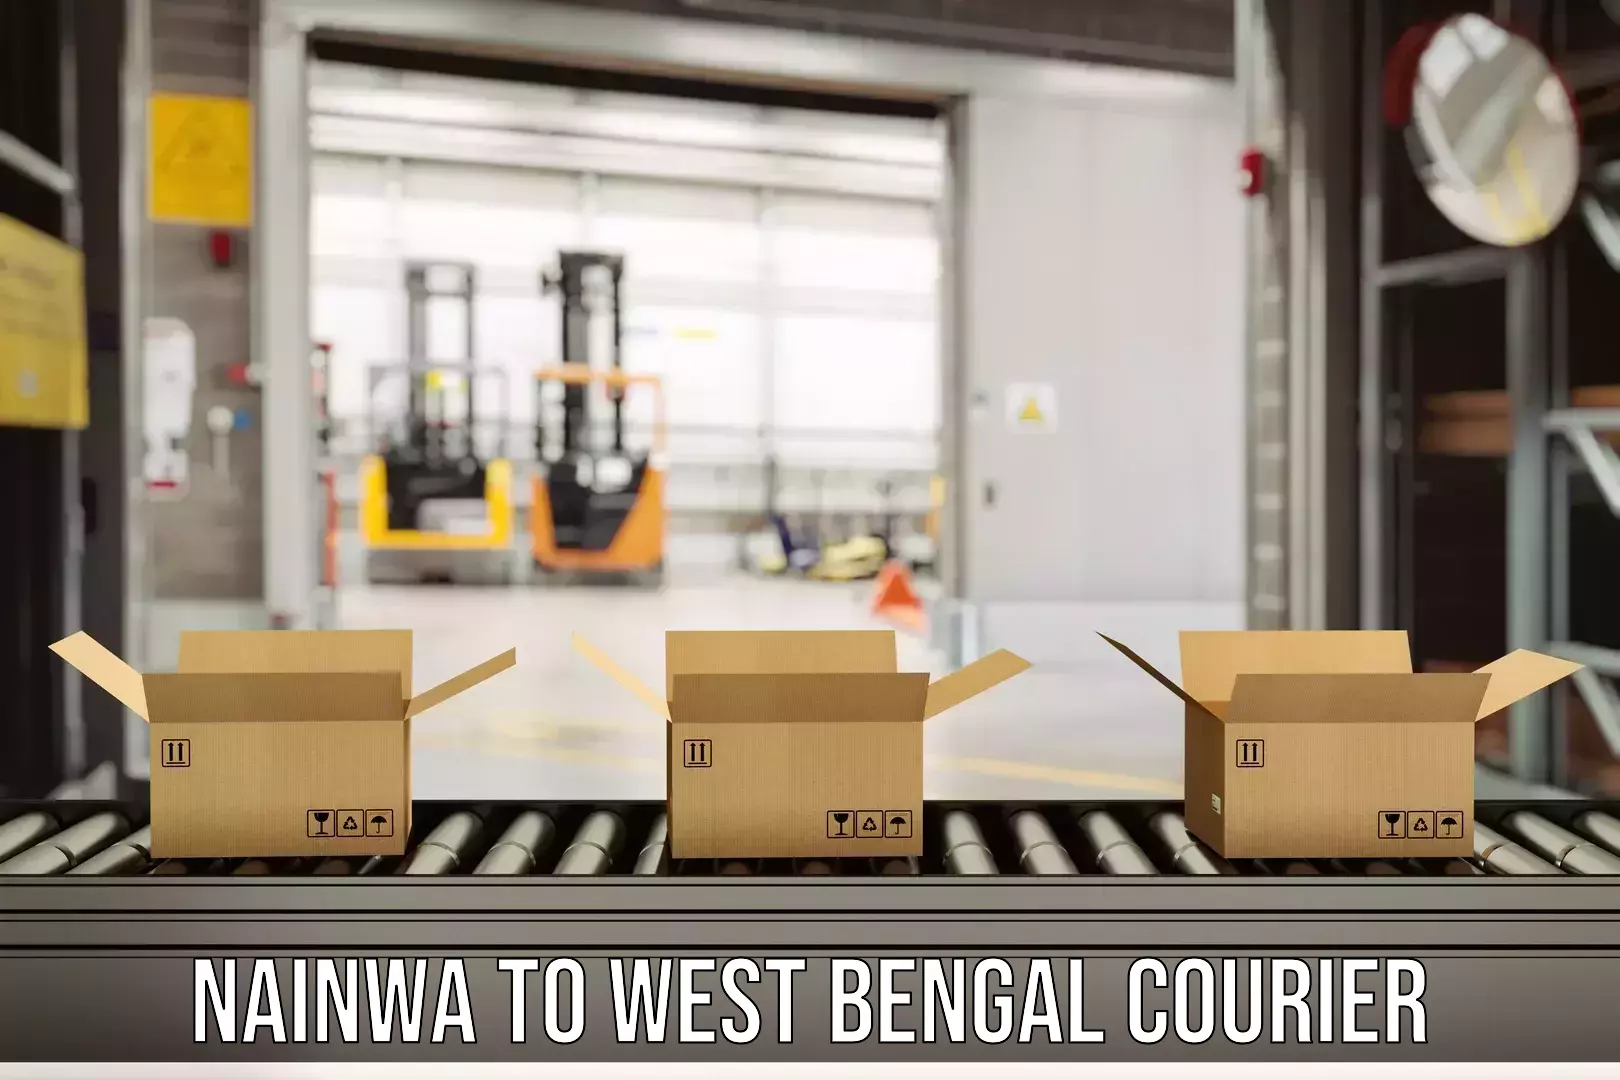 Courier service comparison in Nainwa to West Bengal